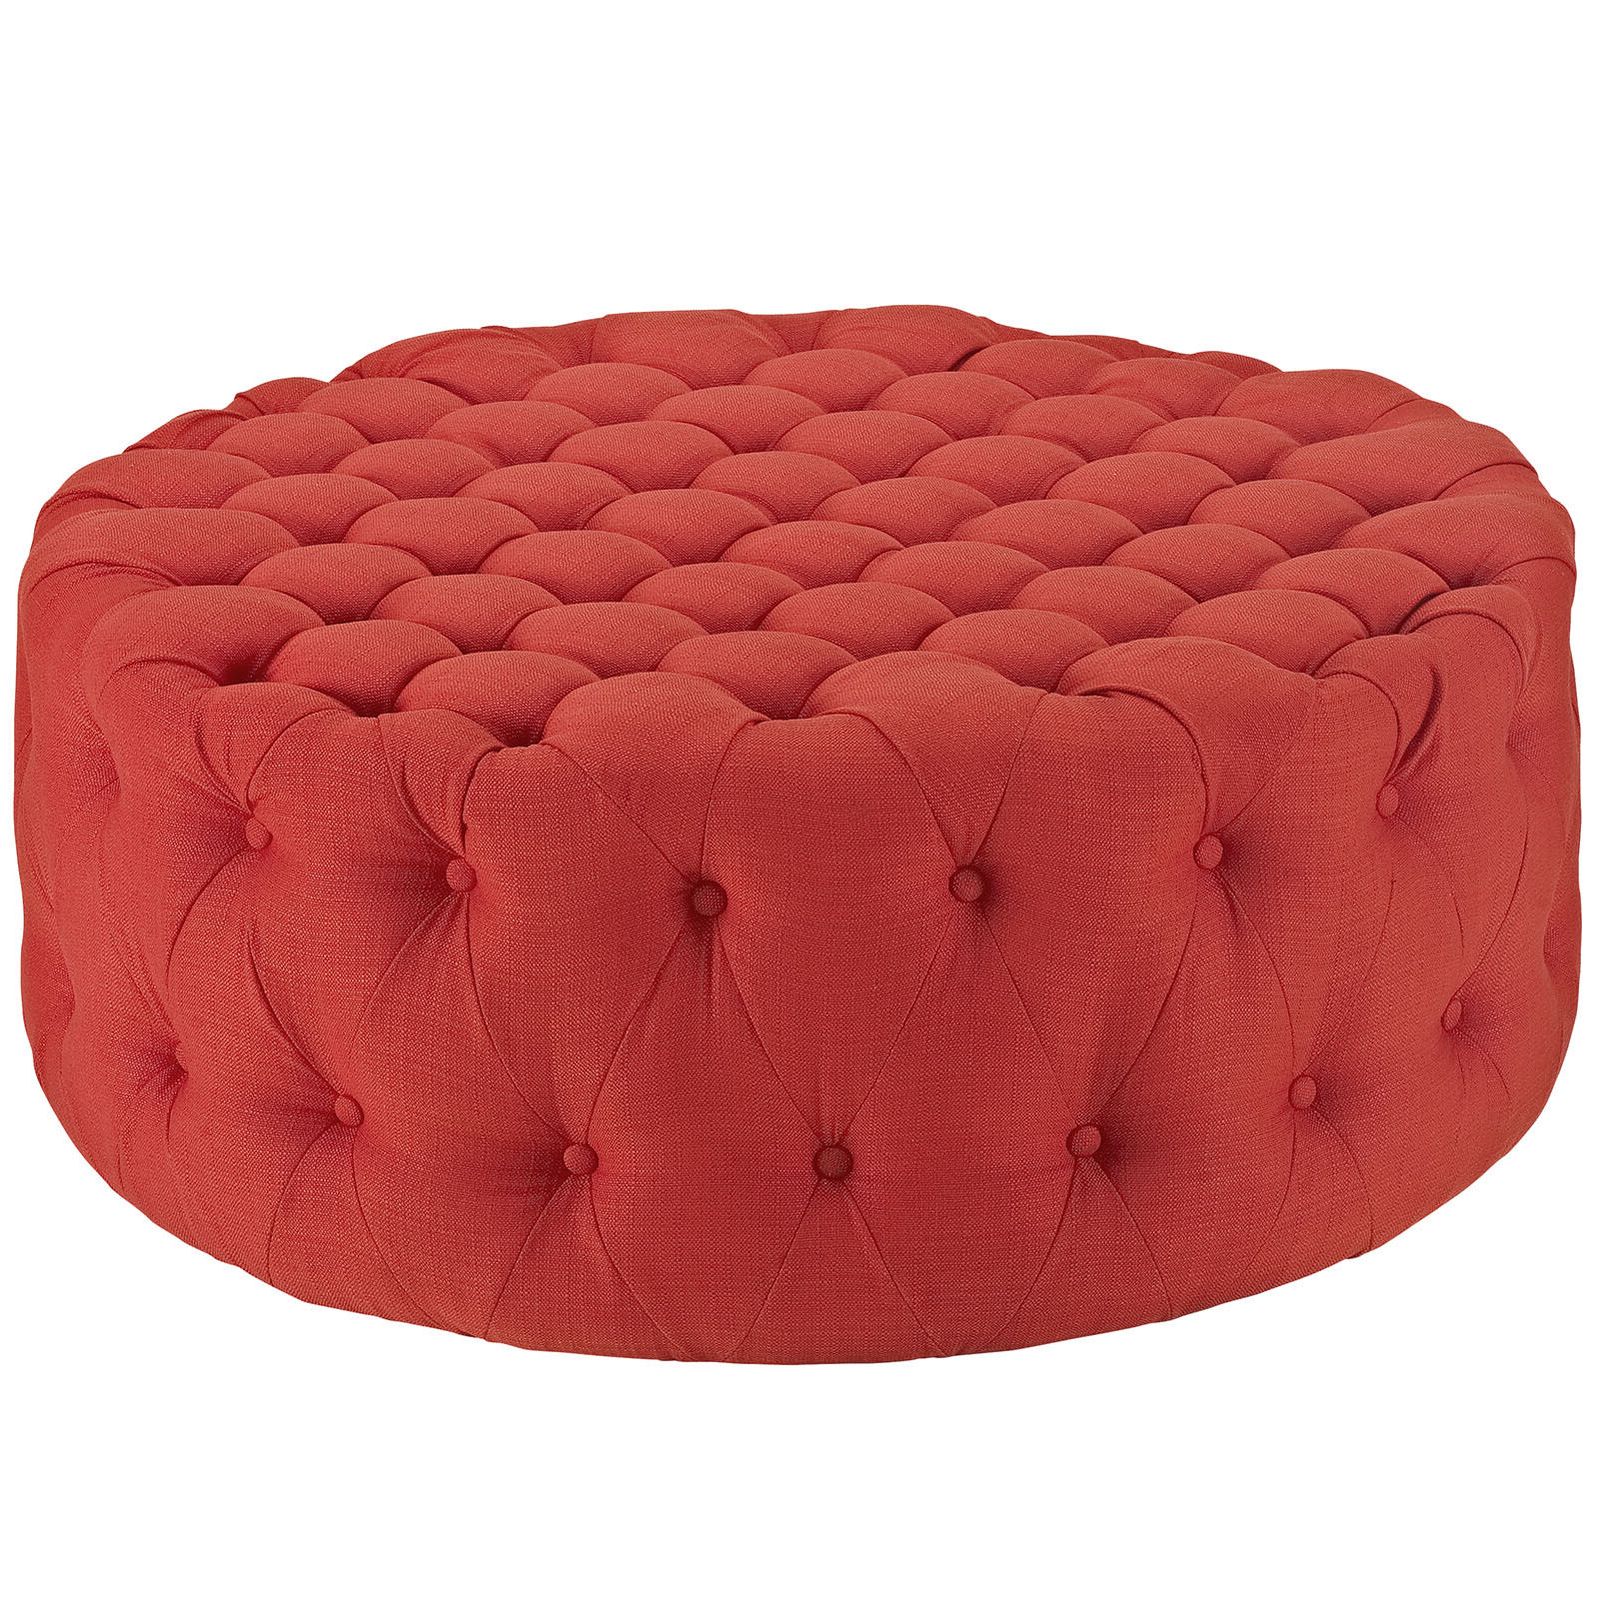 Button Tufted Fabric Upholstered Round Ottoman In Atomic Red Pertaining To Current Tufted Fabric Ottomans (View 6 of 10)